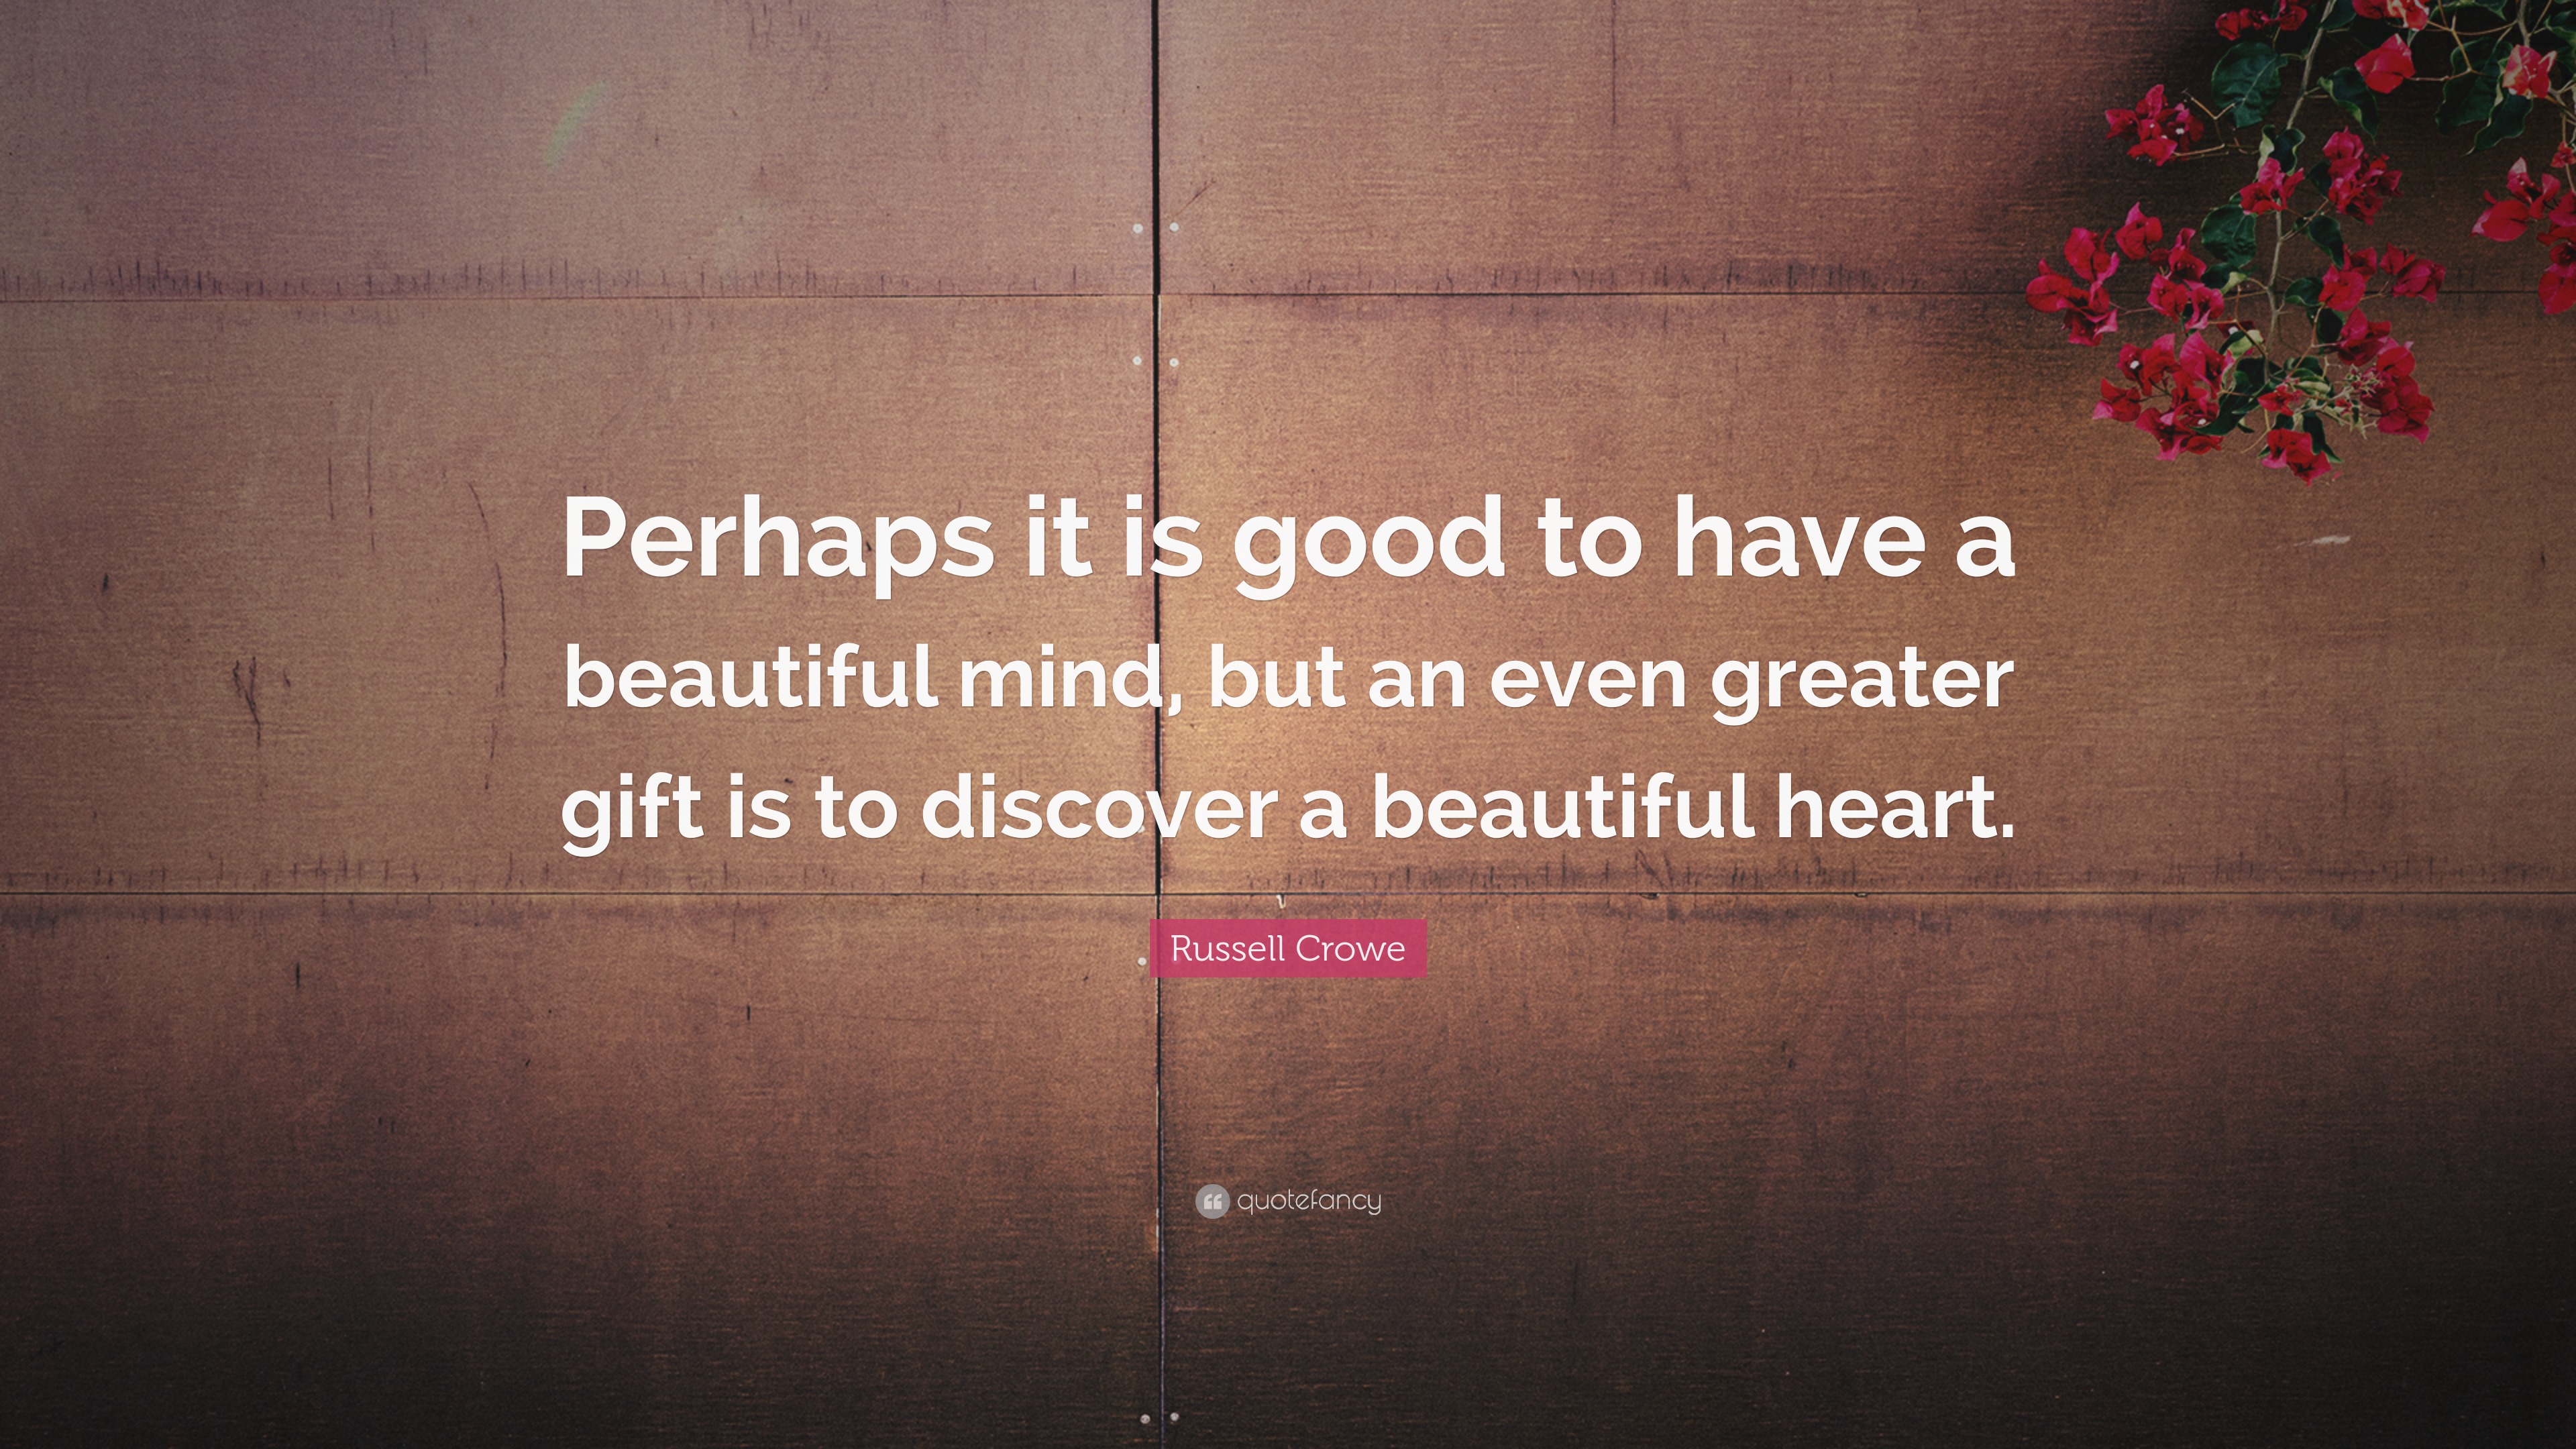 Russell Crowe Quote “Perhaps it is good to have a beautiful mind but